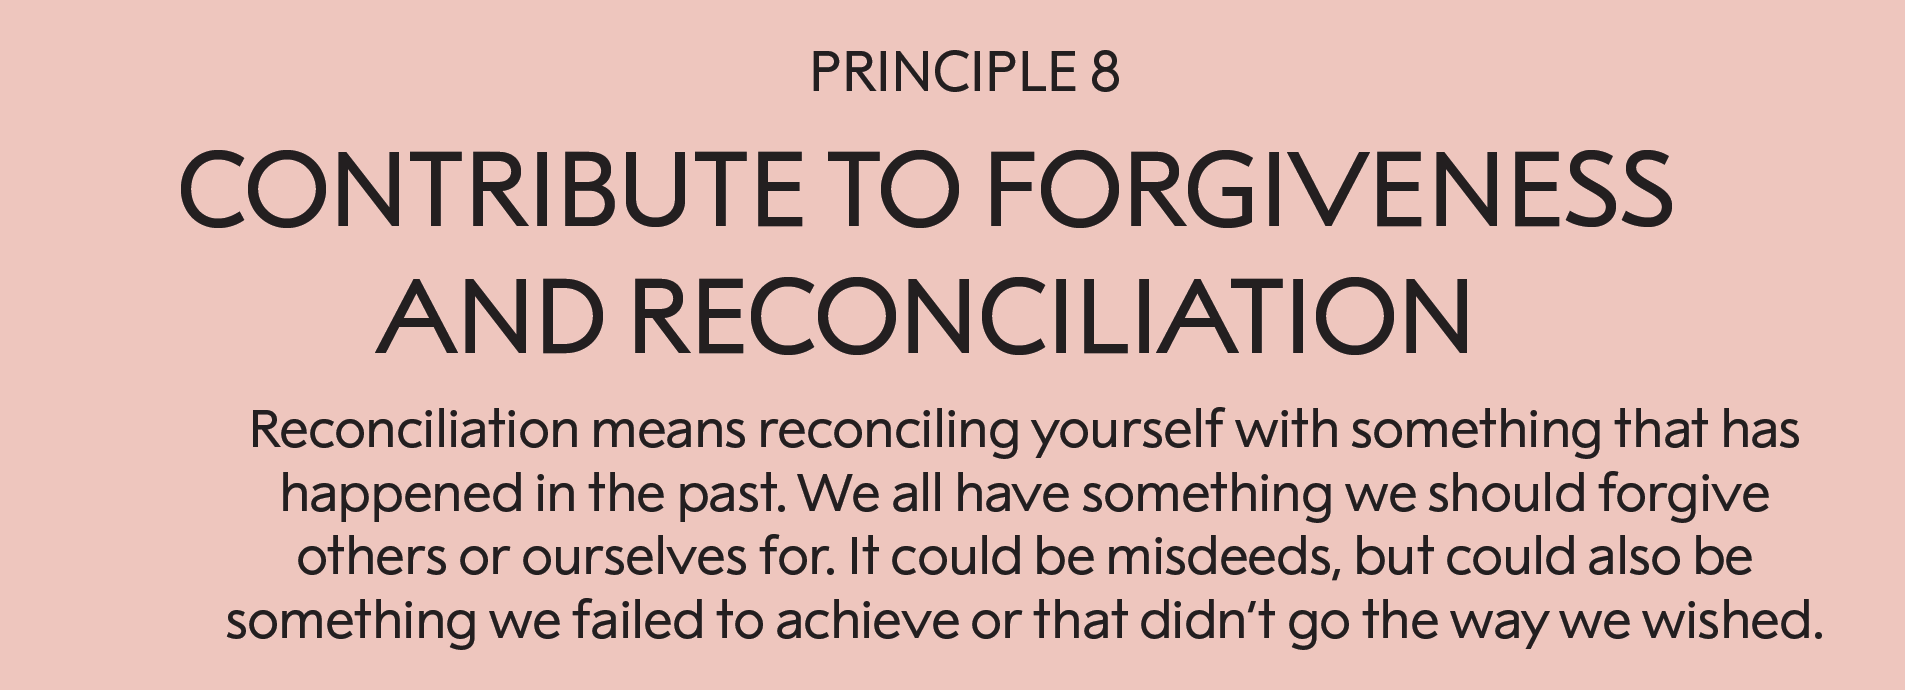 Principle 8: Contribute to forgiveness and reconciliation:   Reconciliation means reconciling yourself with something that has happened in the past. We all have something we should forgive others or ourselves for. This may be misdeeds, but can also be something we failed to achieve or that didn’t go the way we wished.       